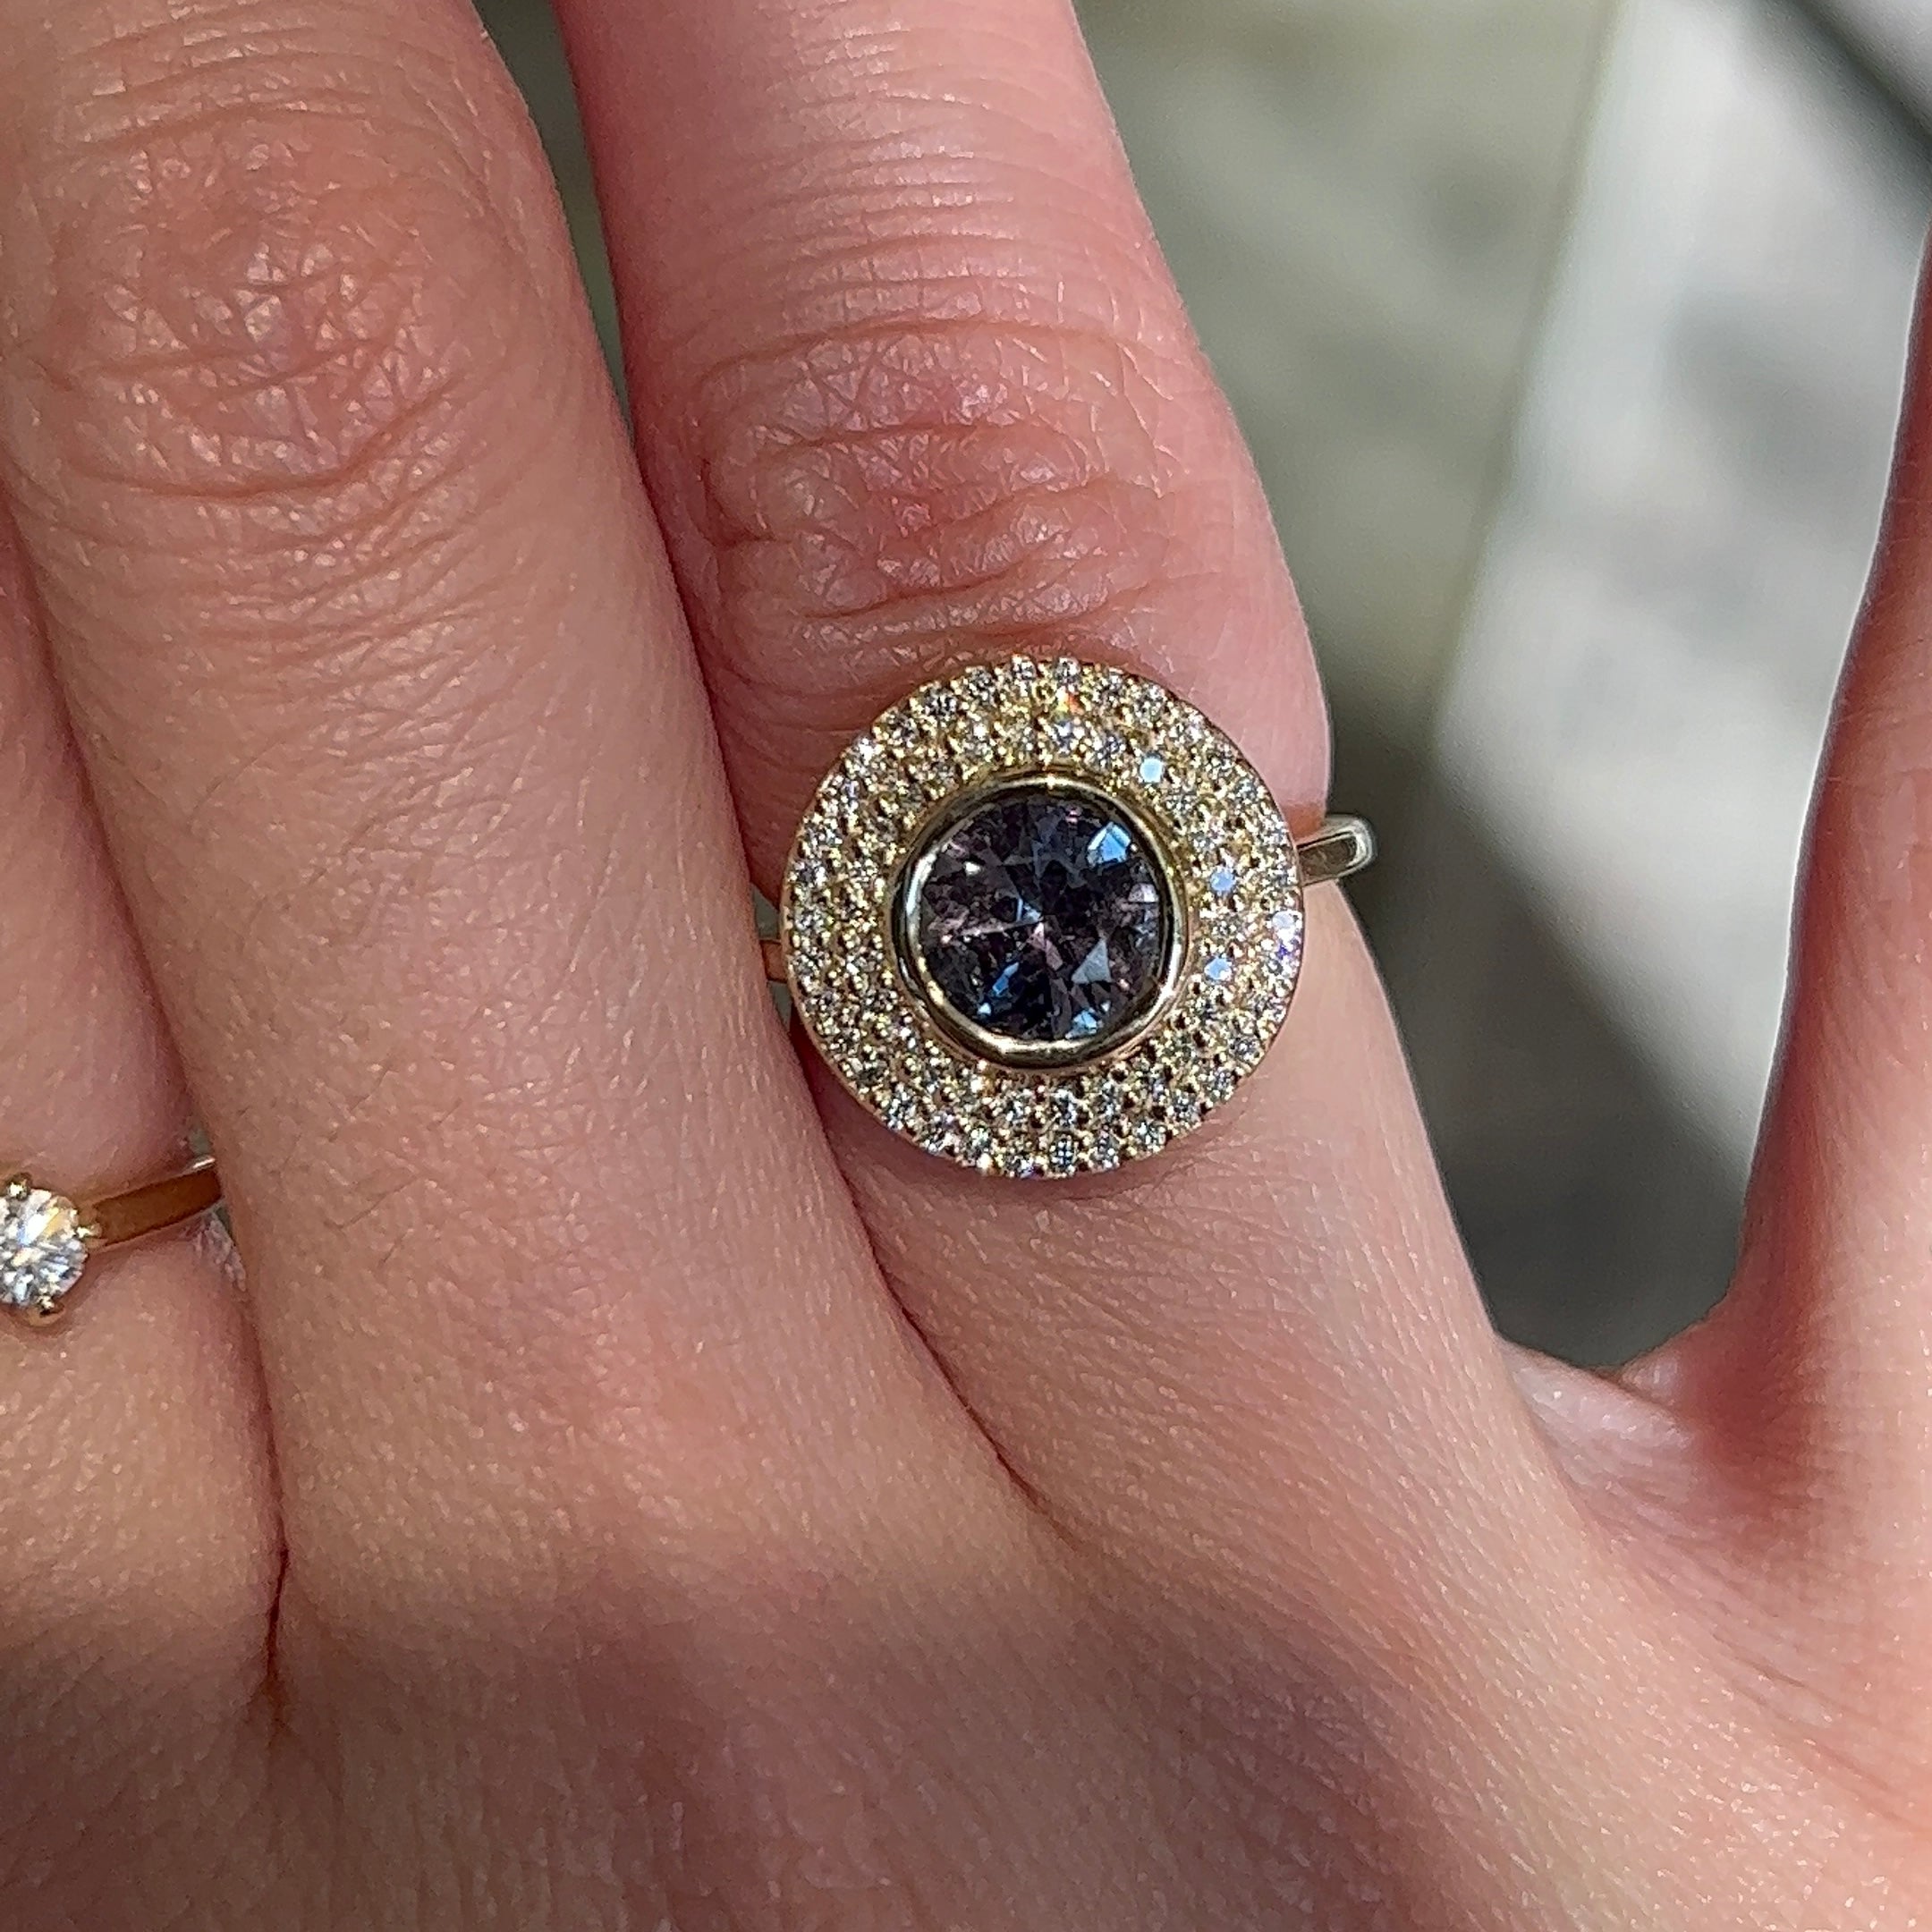 14k yellow gold engagement ring with a round purple sapphire and double halo of diamonds worn on a hand